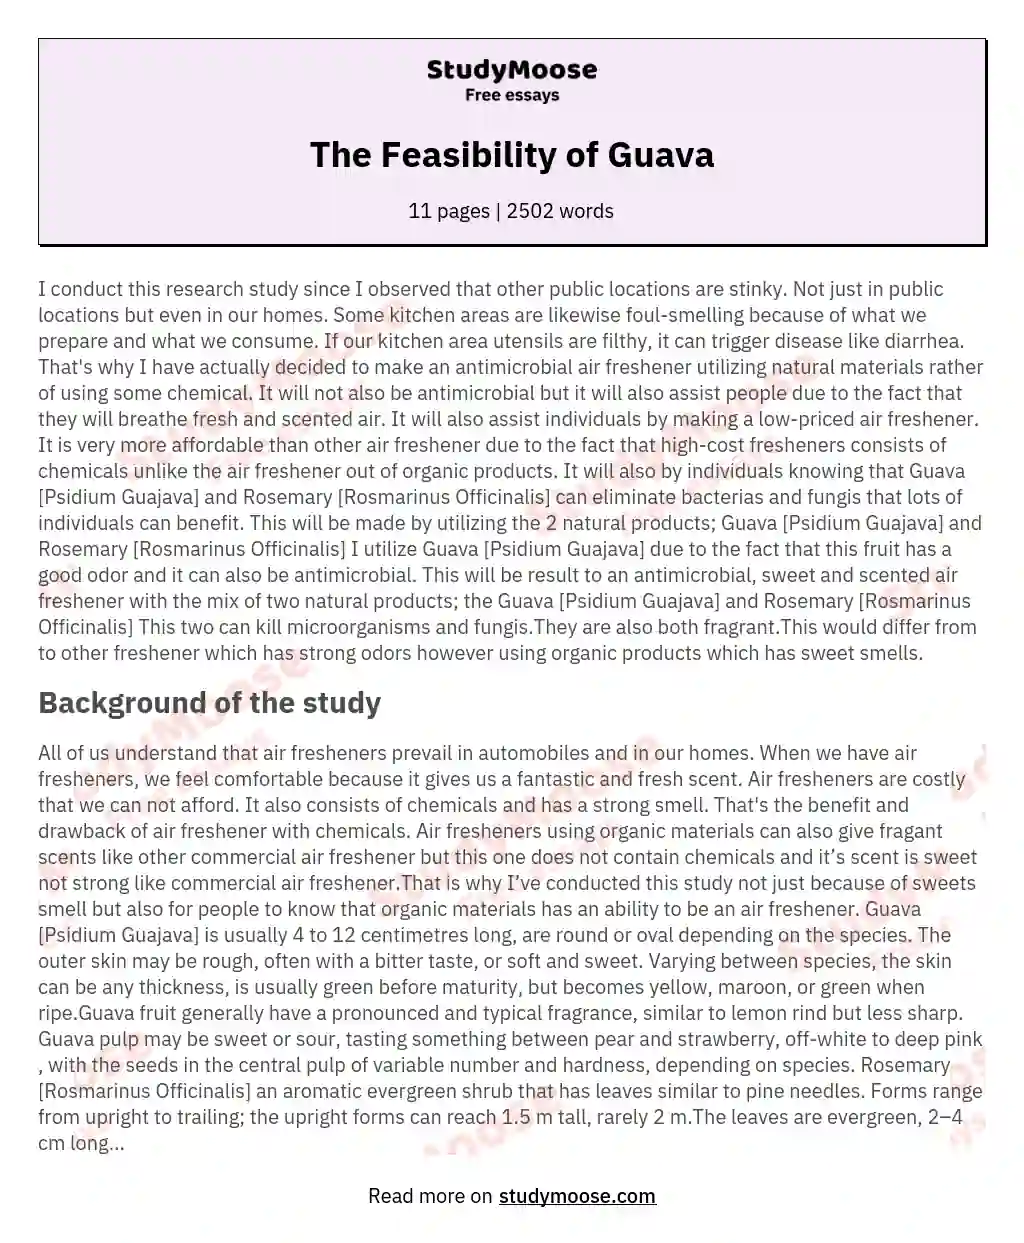 The Feasibility of Guava essay